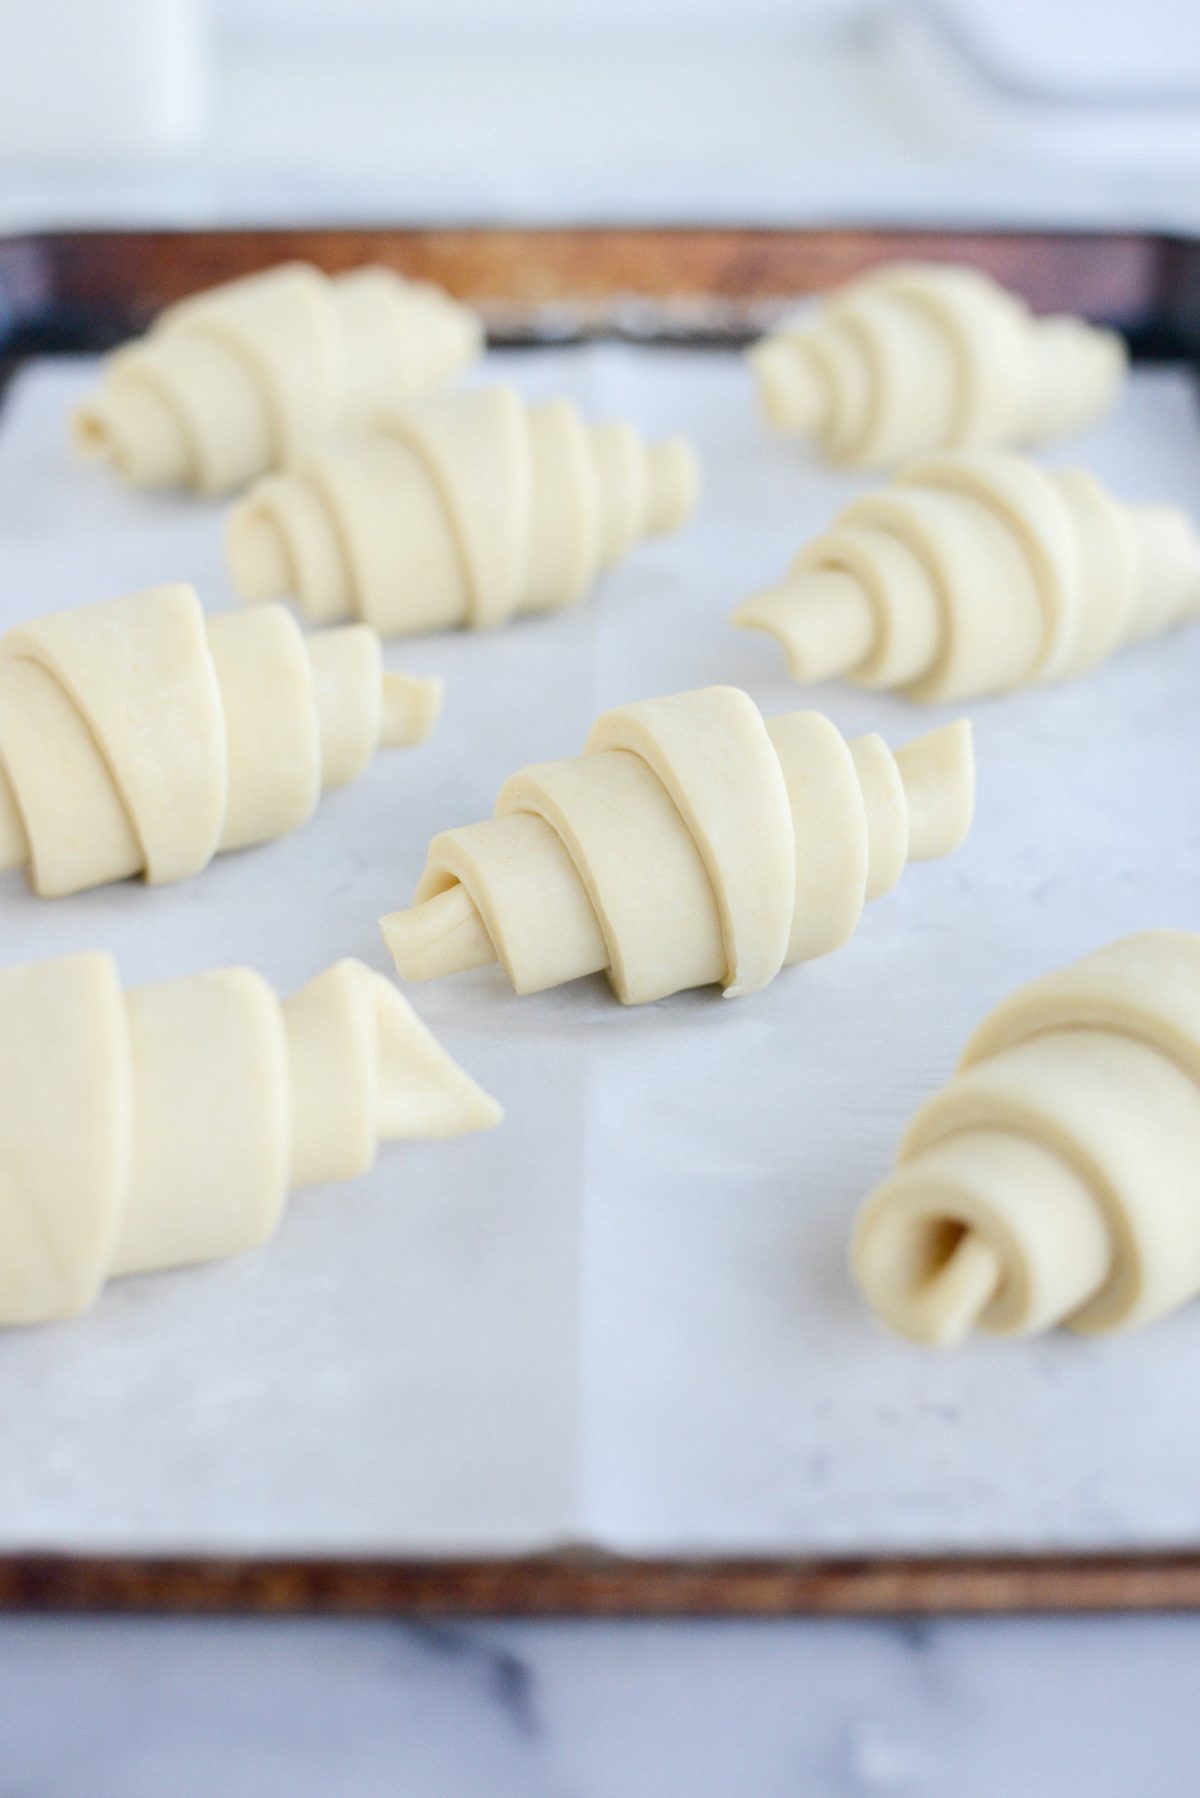 rolled croissants on lined rimmed baking sheet